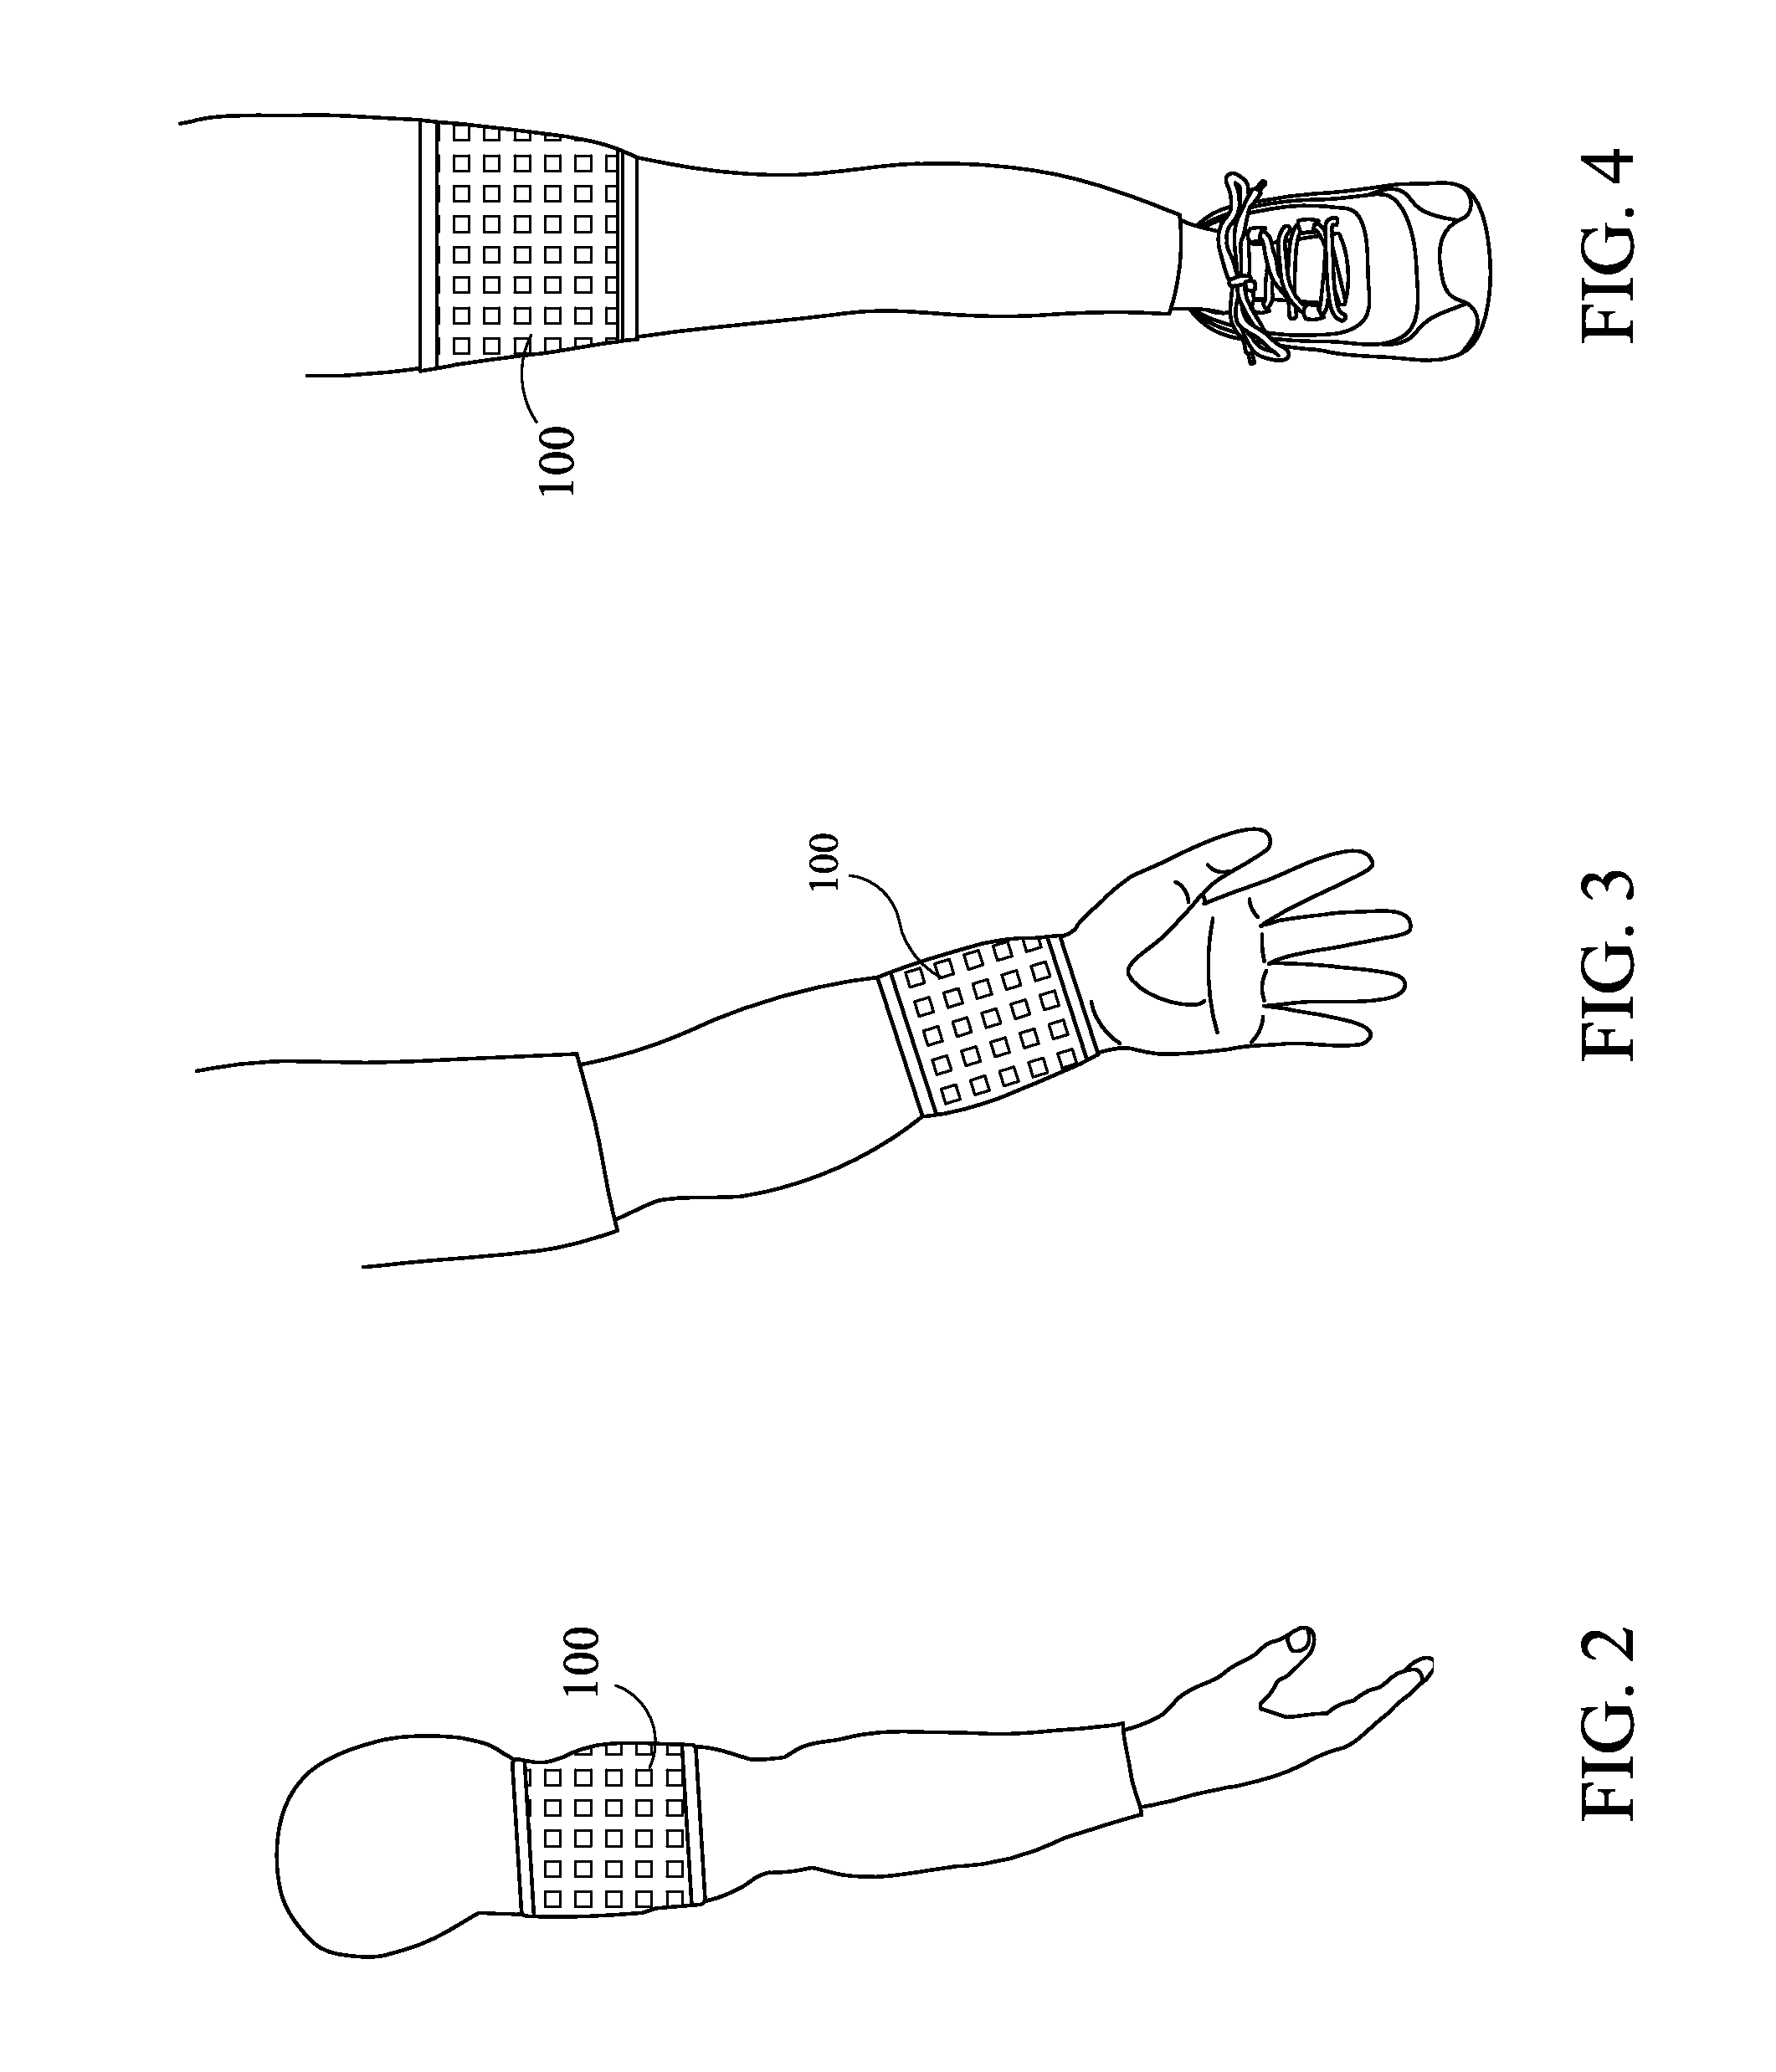 Apparatus, system and method for reporting a player's game plays during a game